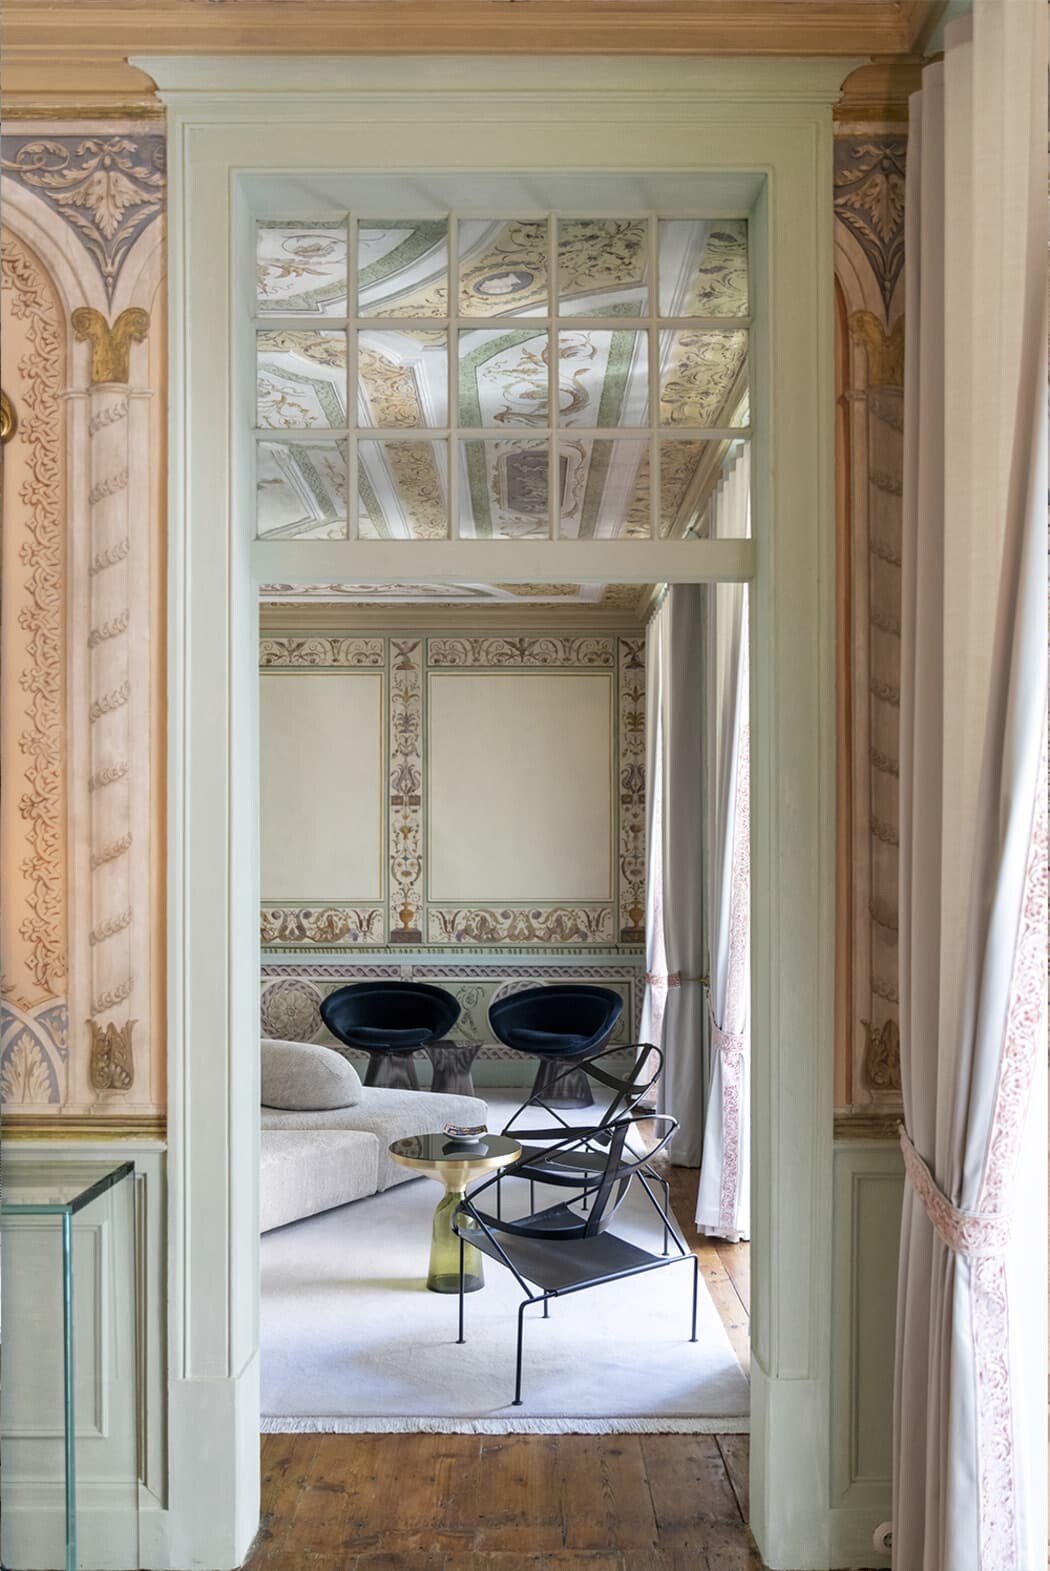 CR Apartment, A Renovation Meant to Respect the Patrimony of the 17th Century